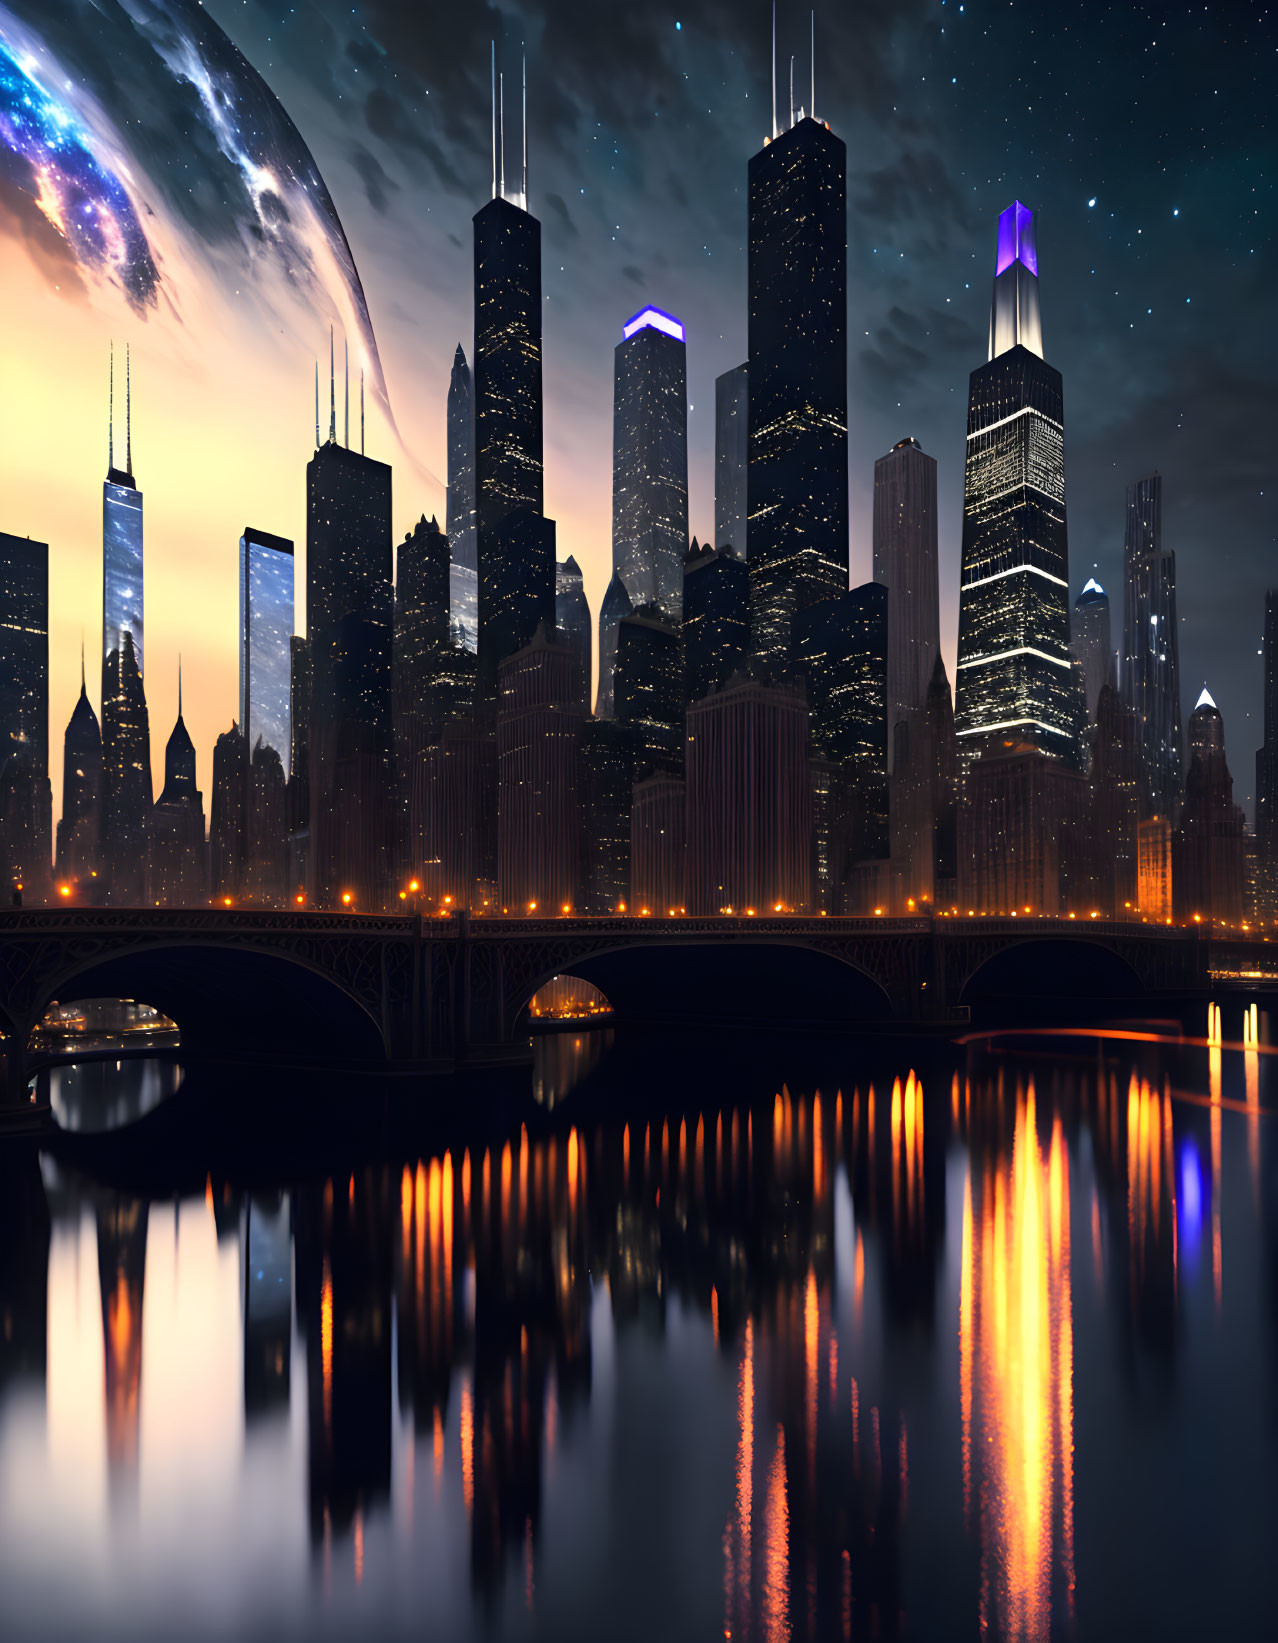 Brightly lit skyscrapers reflected in tranquil river under starry sky